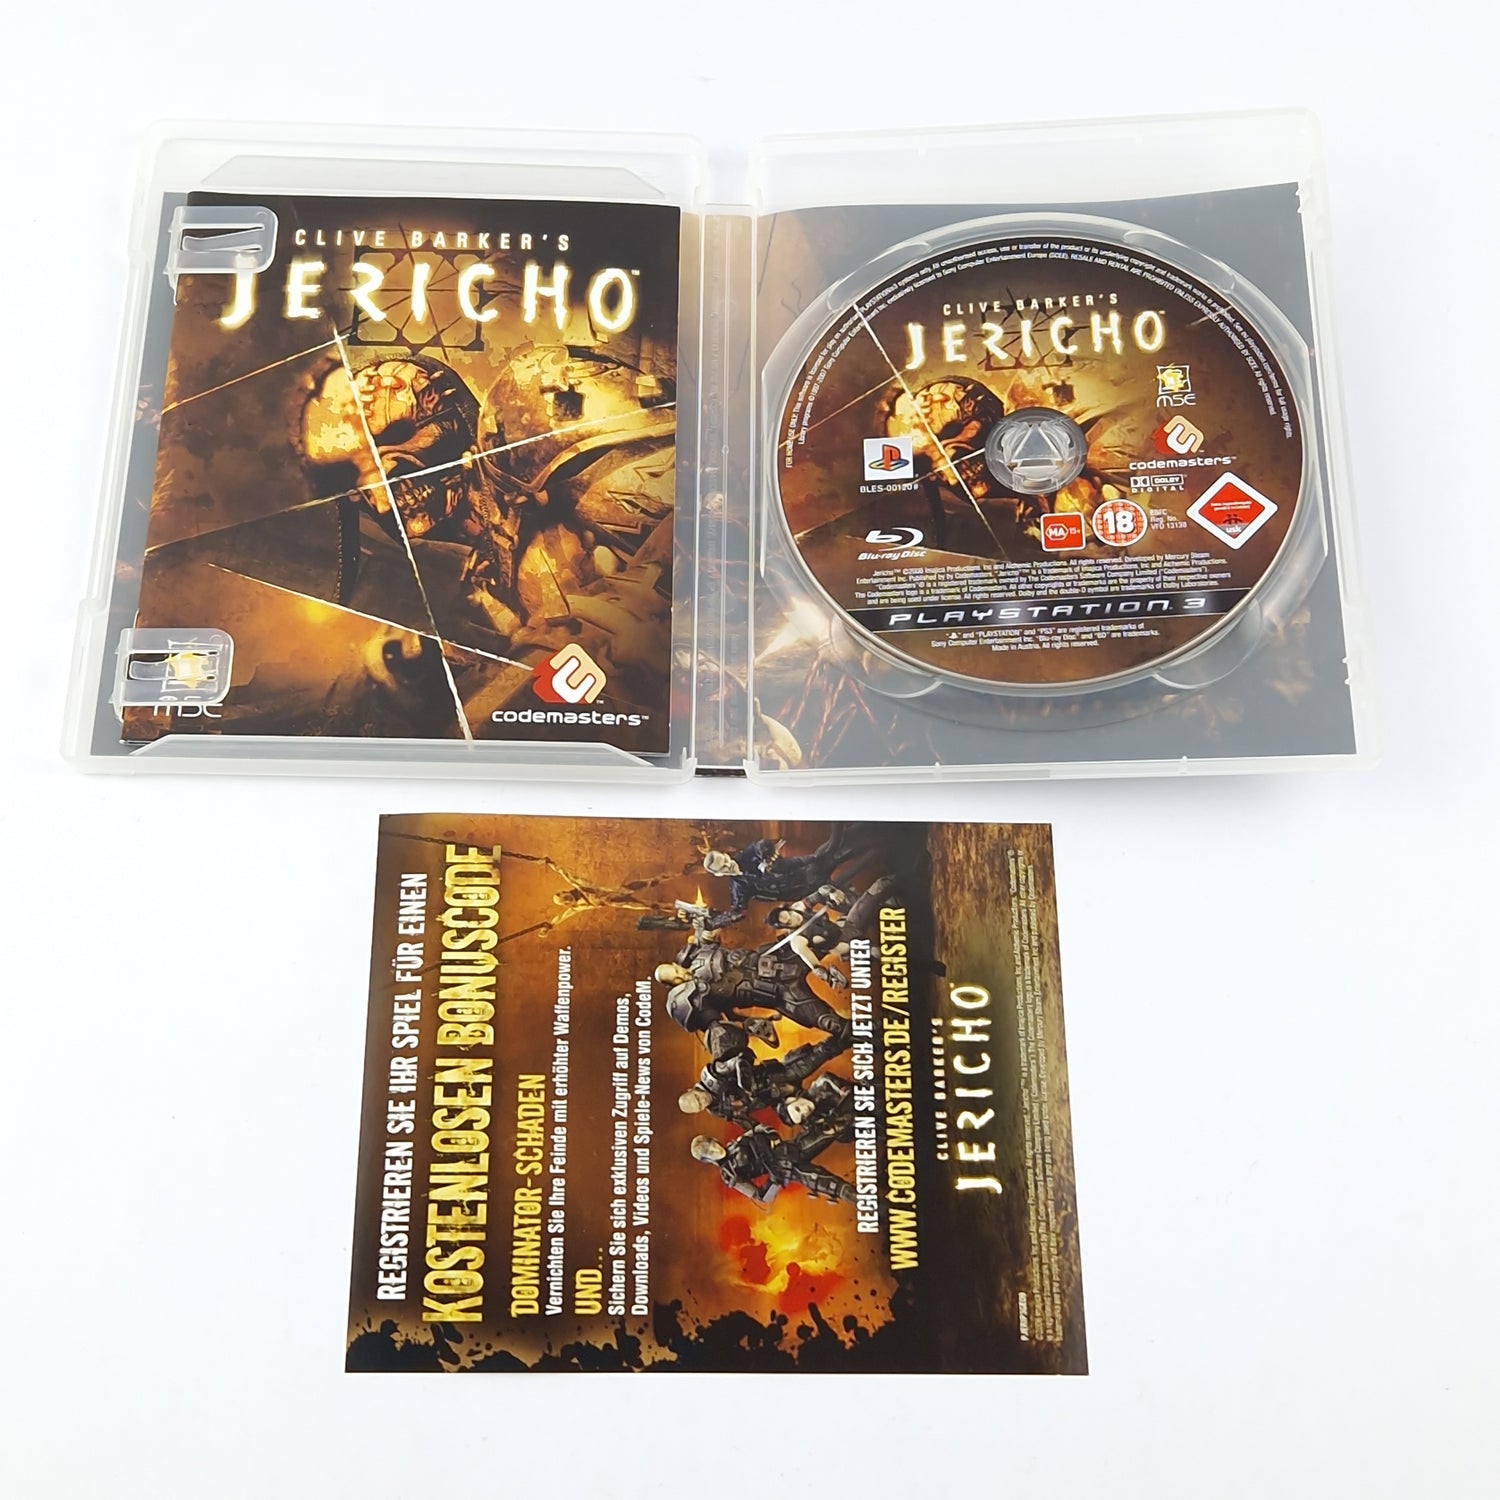 Playstation 3 Spiel : Jericho - OVP Anleitung CD - SONY PS3 USK18